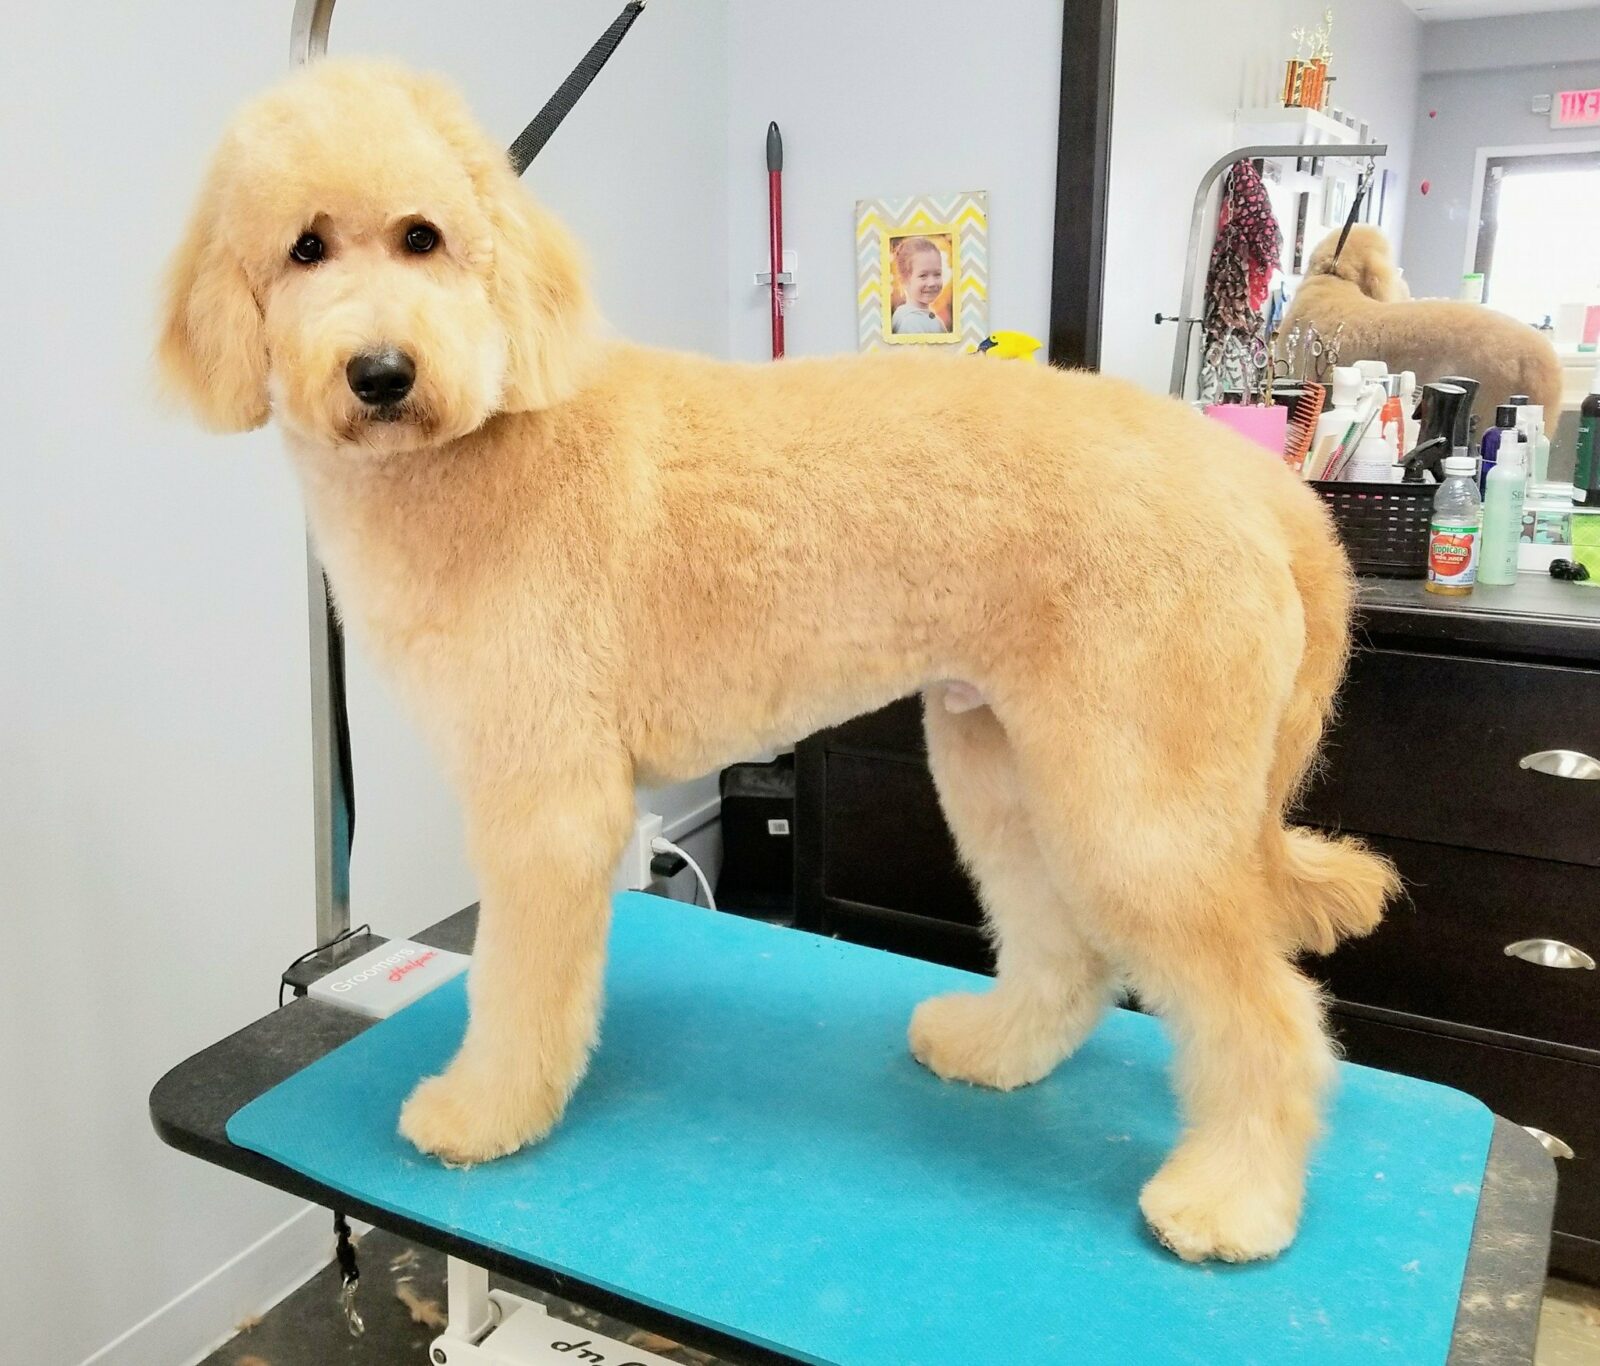 Smoochie Pooch is the Top dog grooming services in Portage